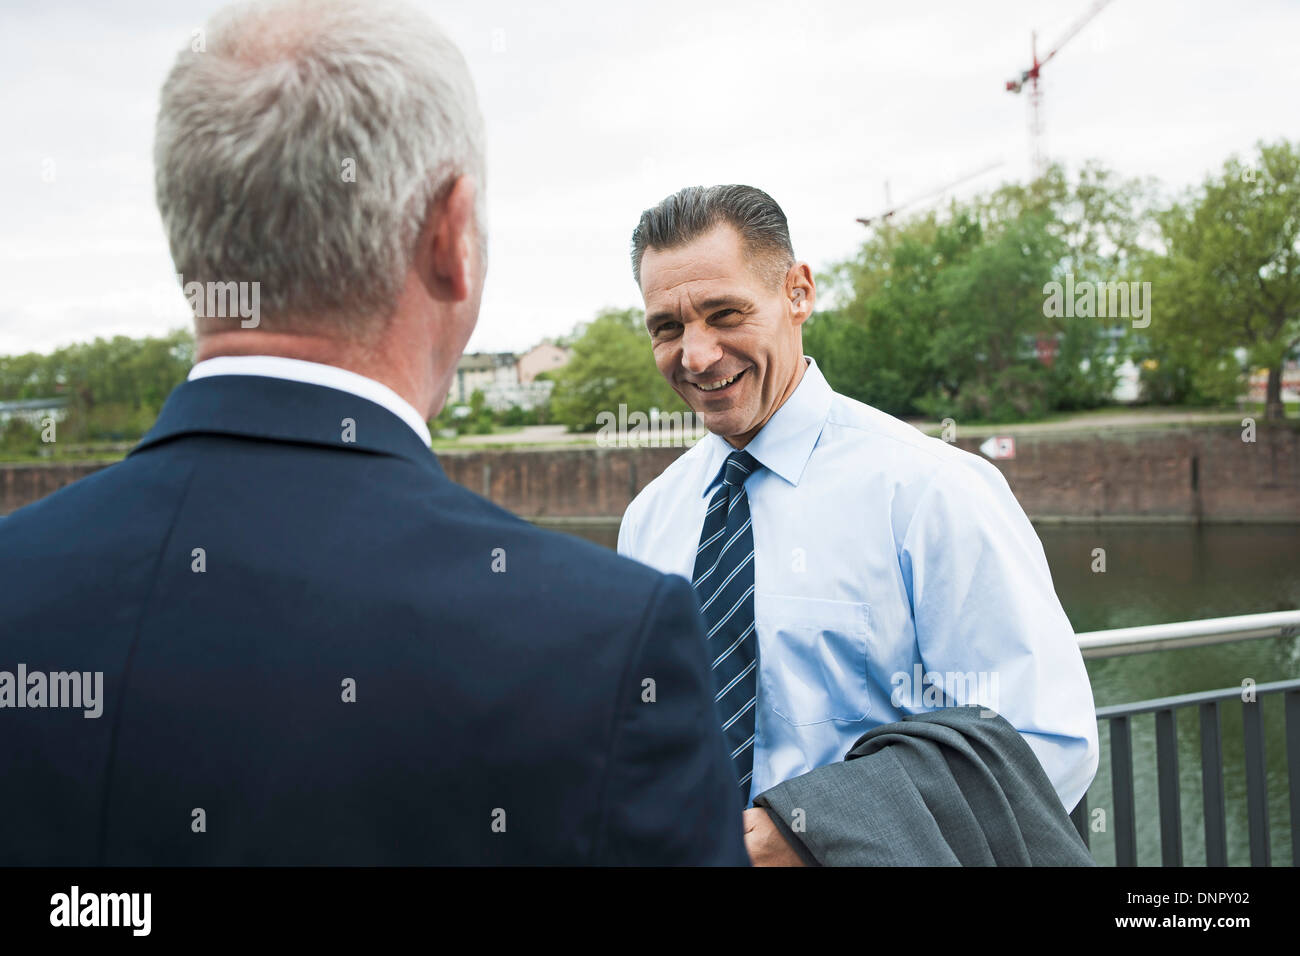 Mature businessmen standing by railing talking, Mannheim, Germany Stock Photo